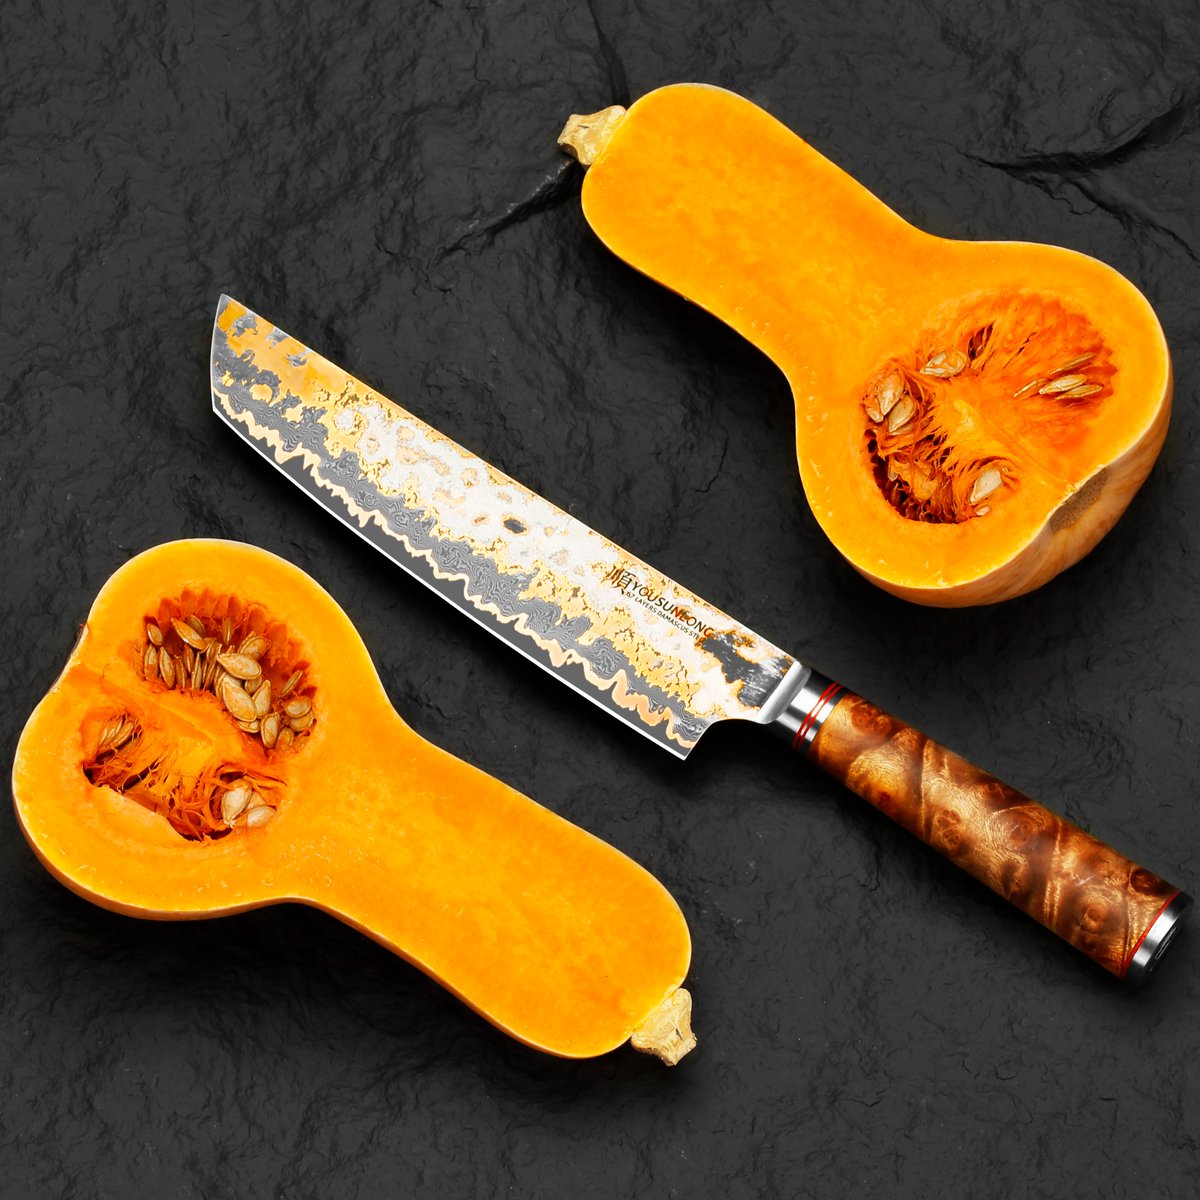 Introducing the YOUSUNLONG 8 Inch Tanto Kitchen Knife - Your Ultimate Pumpkin-Cutting Companion! 

amzn.to/3UmcaEP

#yousunlong #yousunlongknife #kitchenknife #kitchenlife #cookingtools #chefknife #foodprep #kitchenware #cookingtime #cheflife #kitchentools #foodie #cook